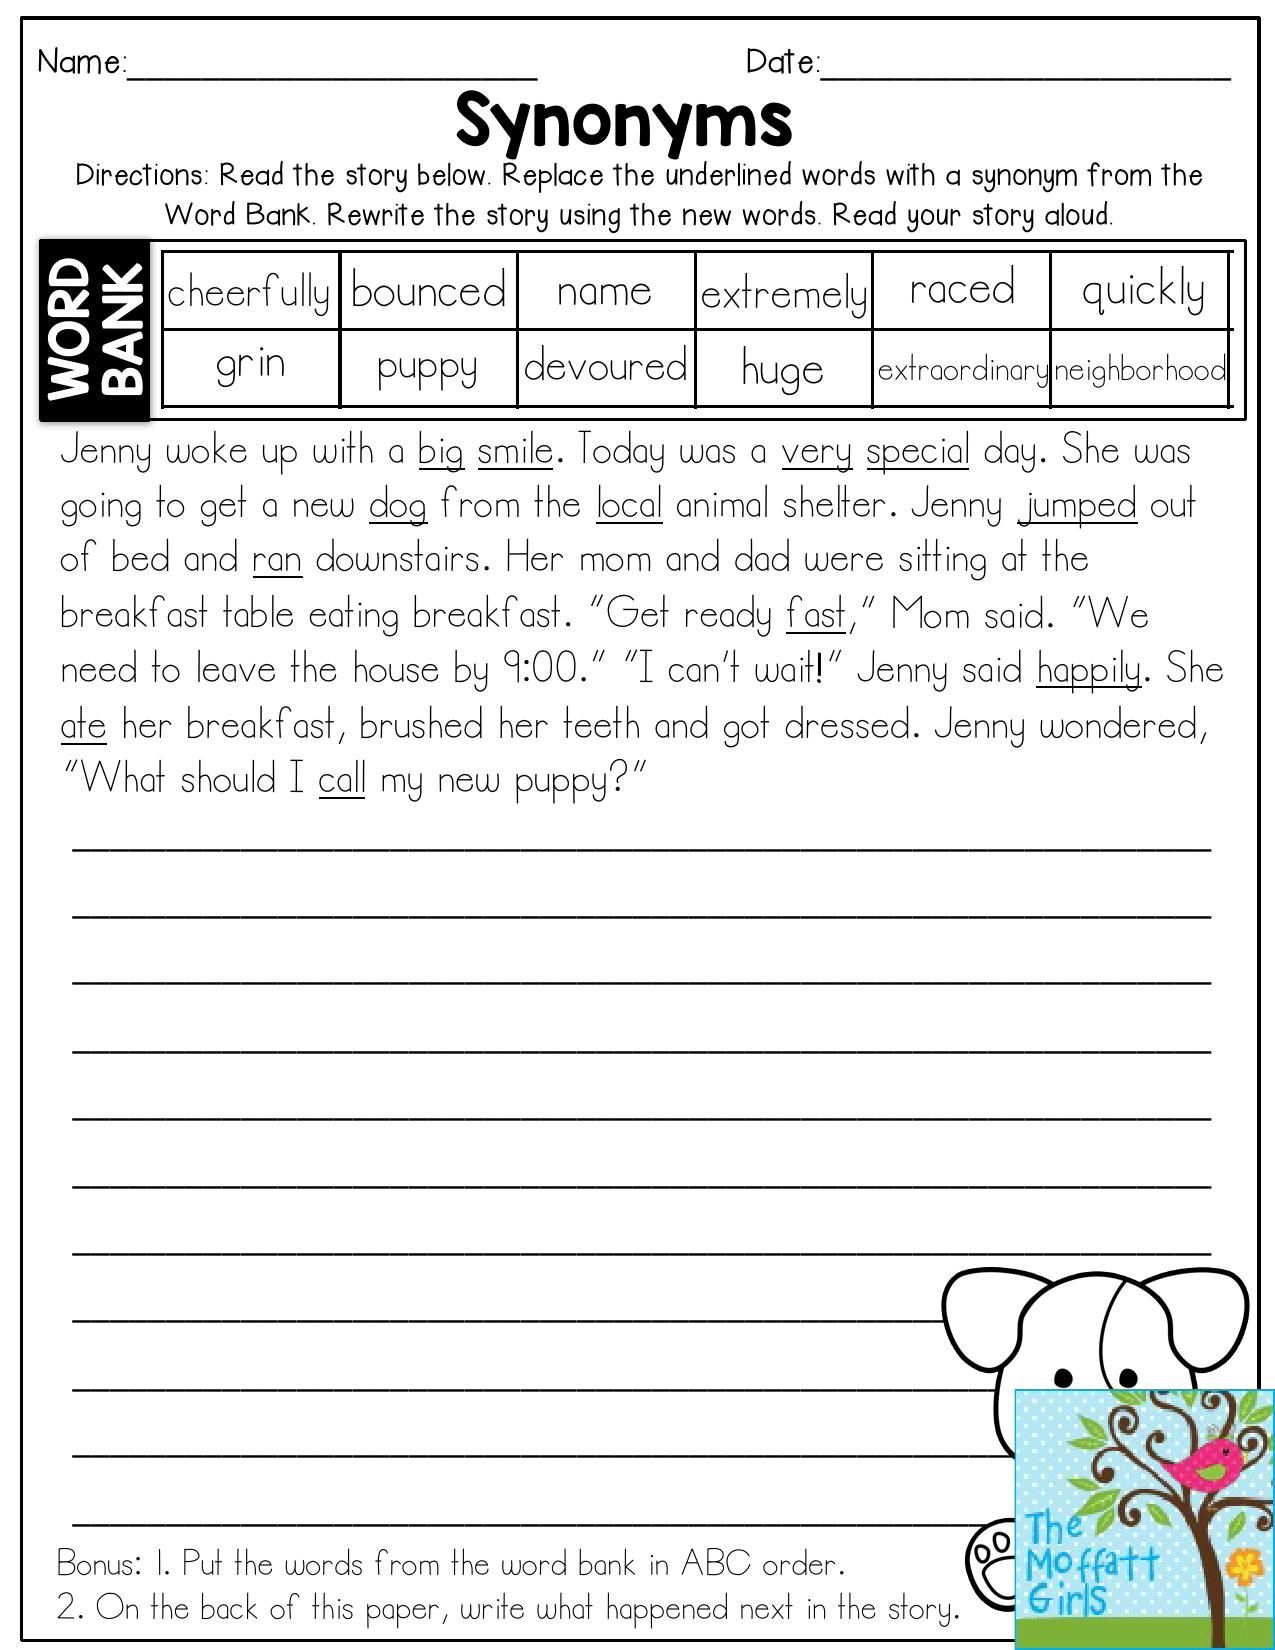 Free Printable Worksheets Synonyms Antonyms And Homonyms Lexia s Blog